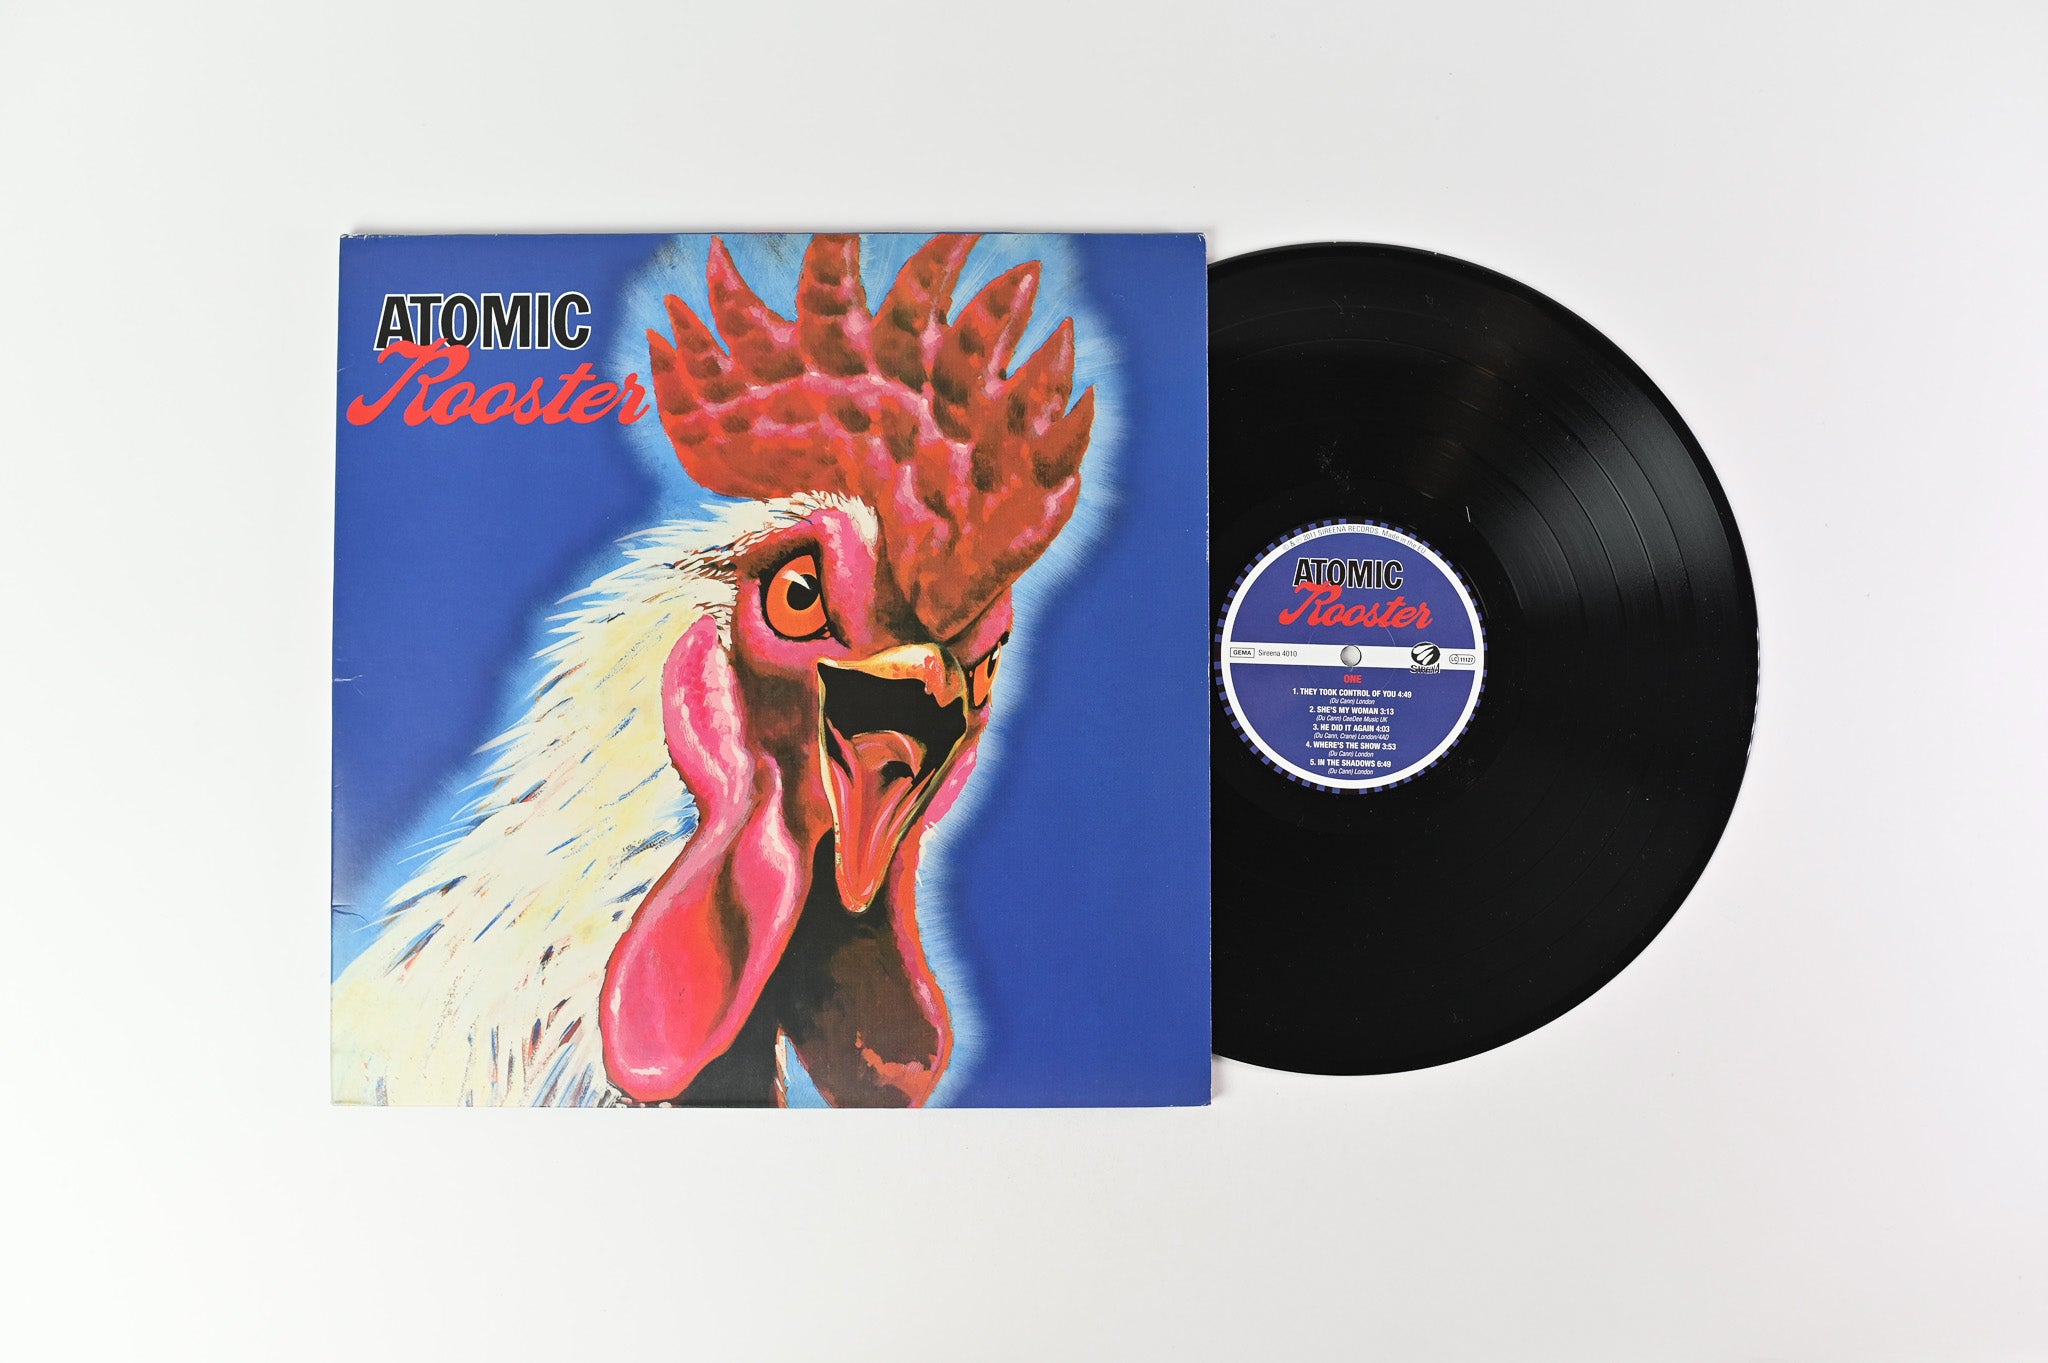 Atomic Rooster - Atomic Rooster on Sireena Records